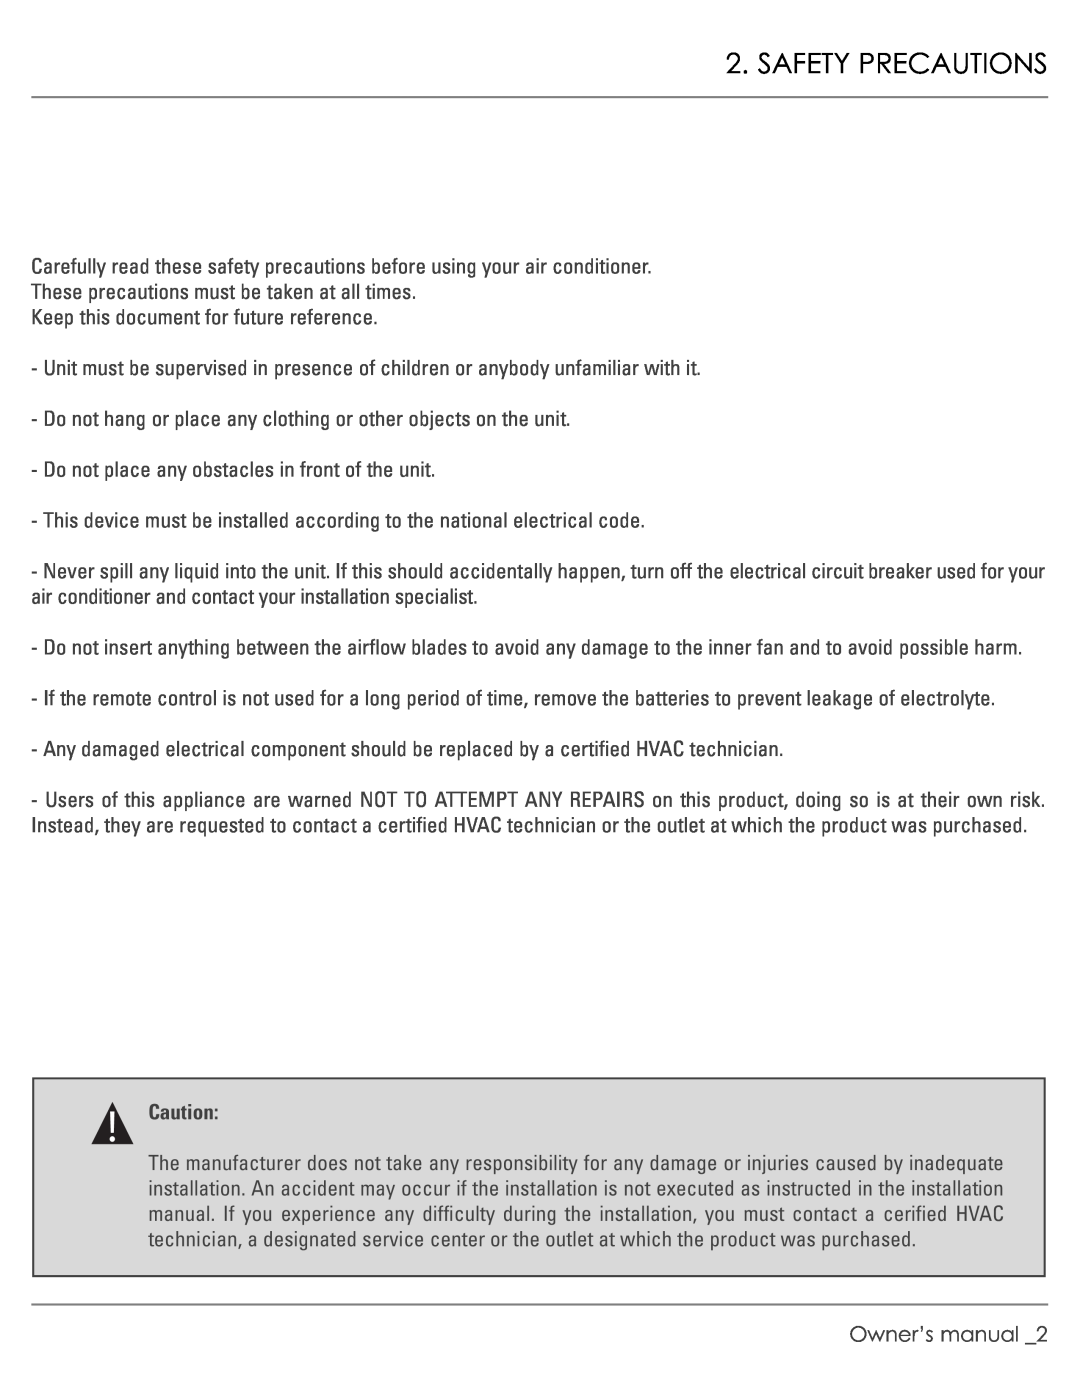 Williams M00045-V01 Safety Precautions, Owner’s manual _2 